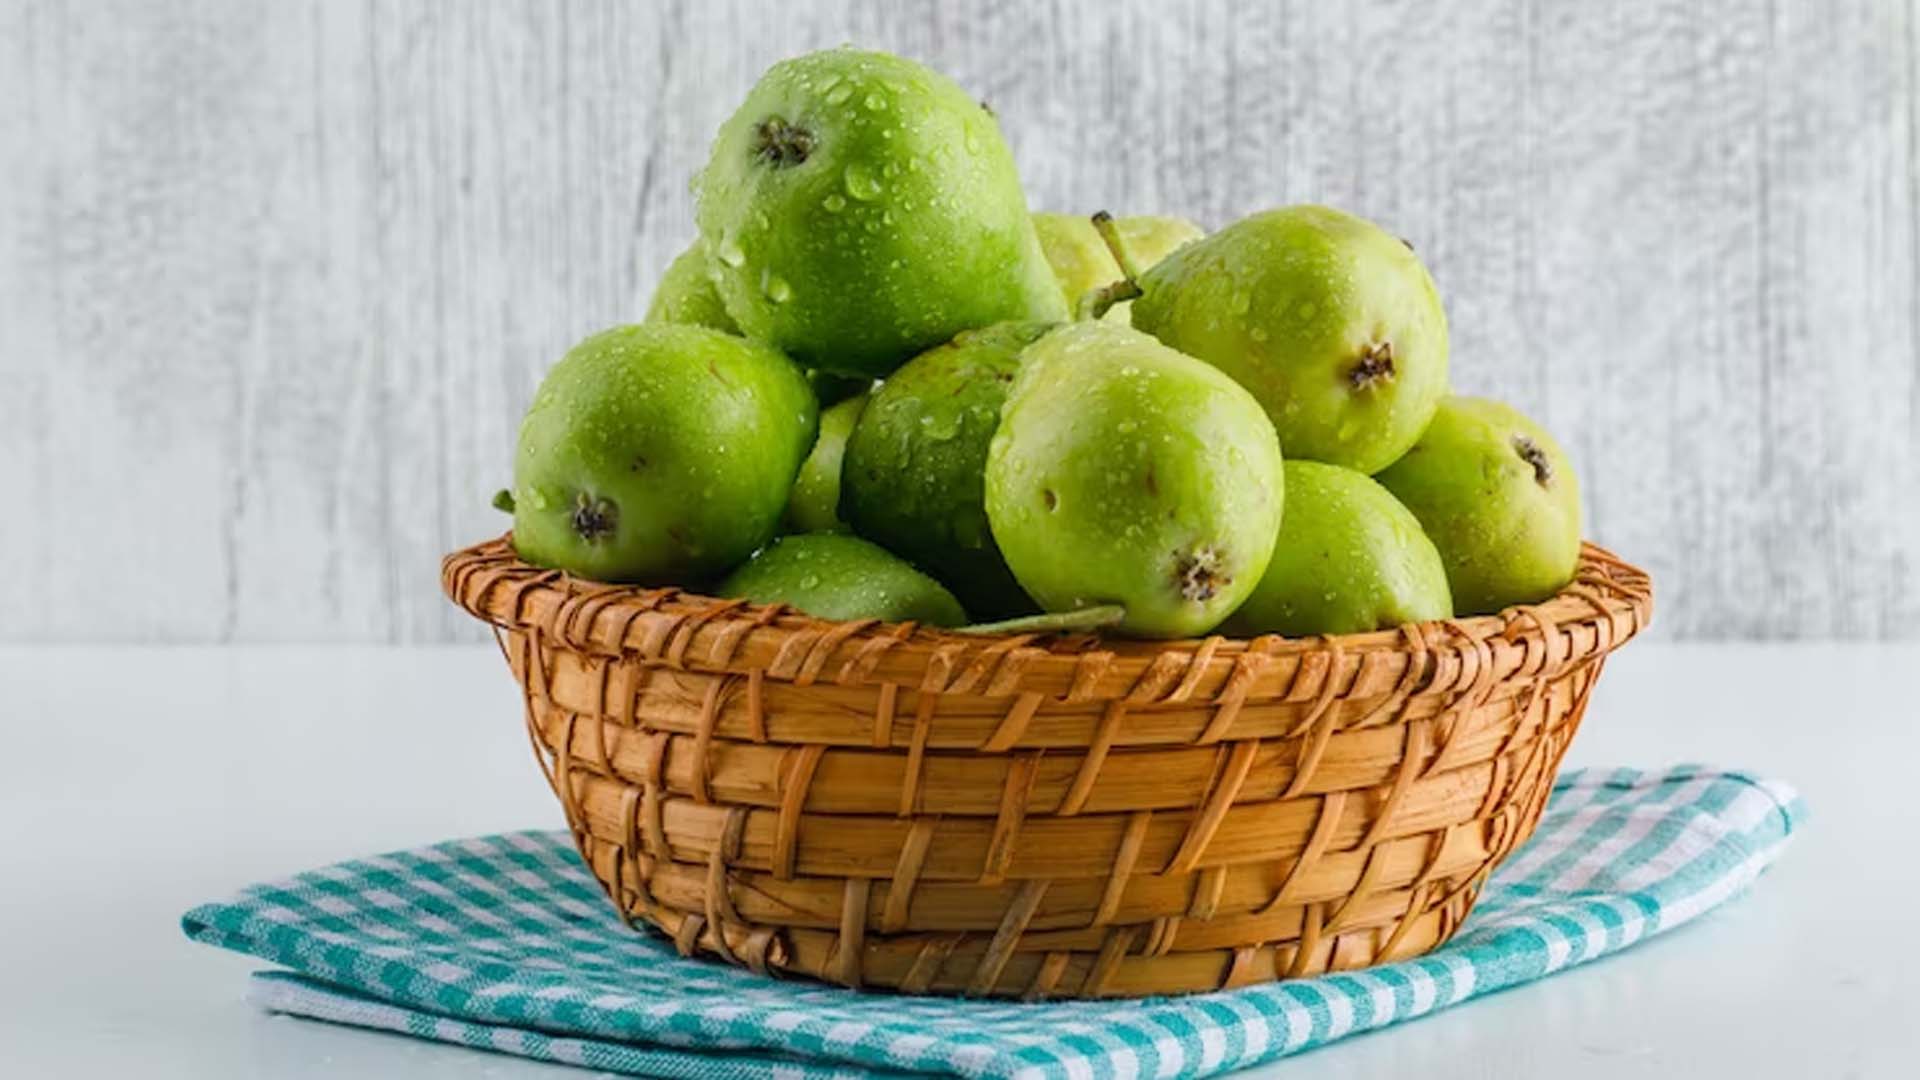 Health Benefits of Pears